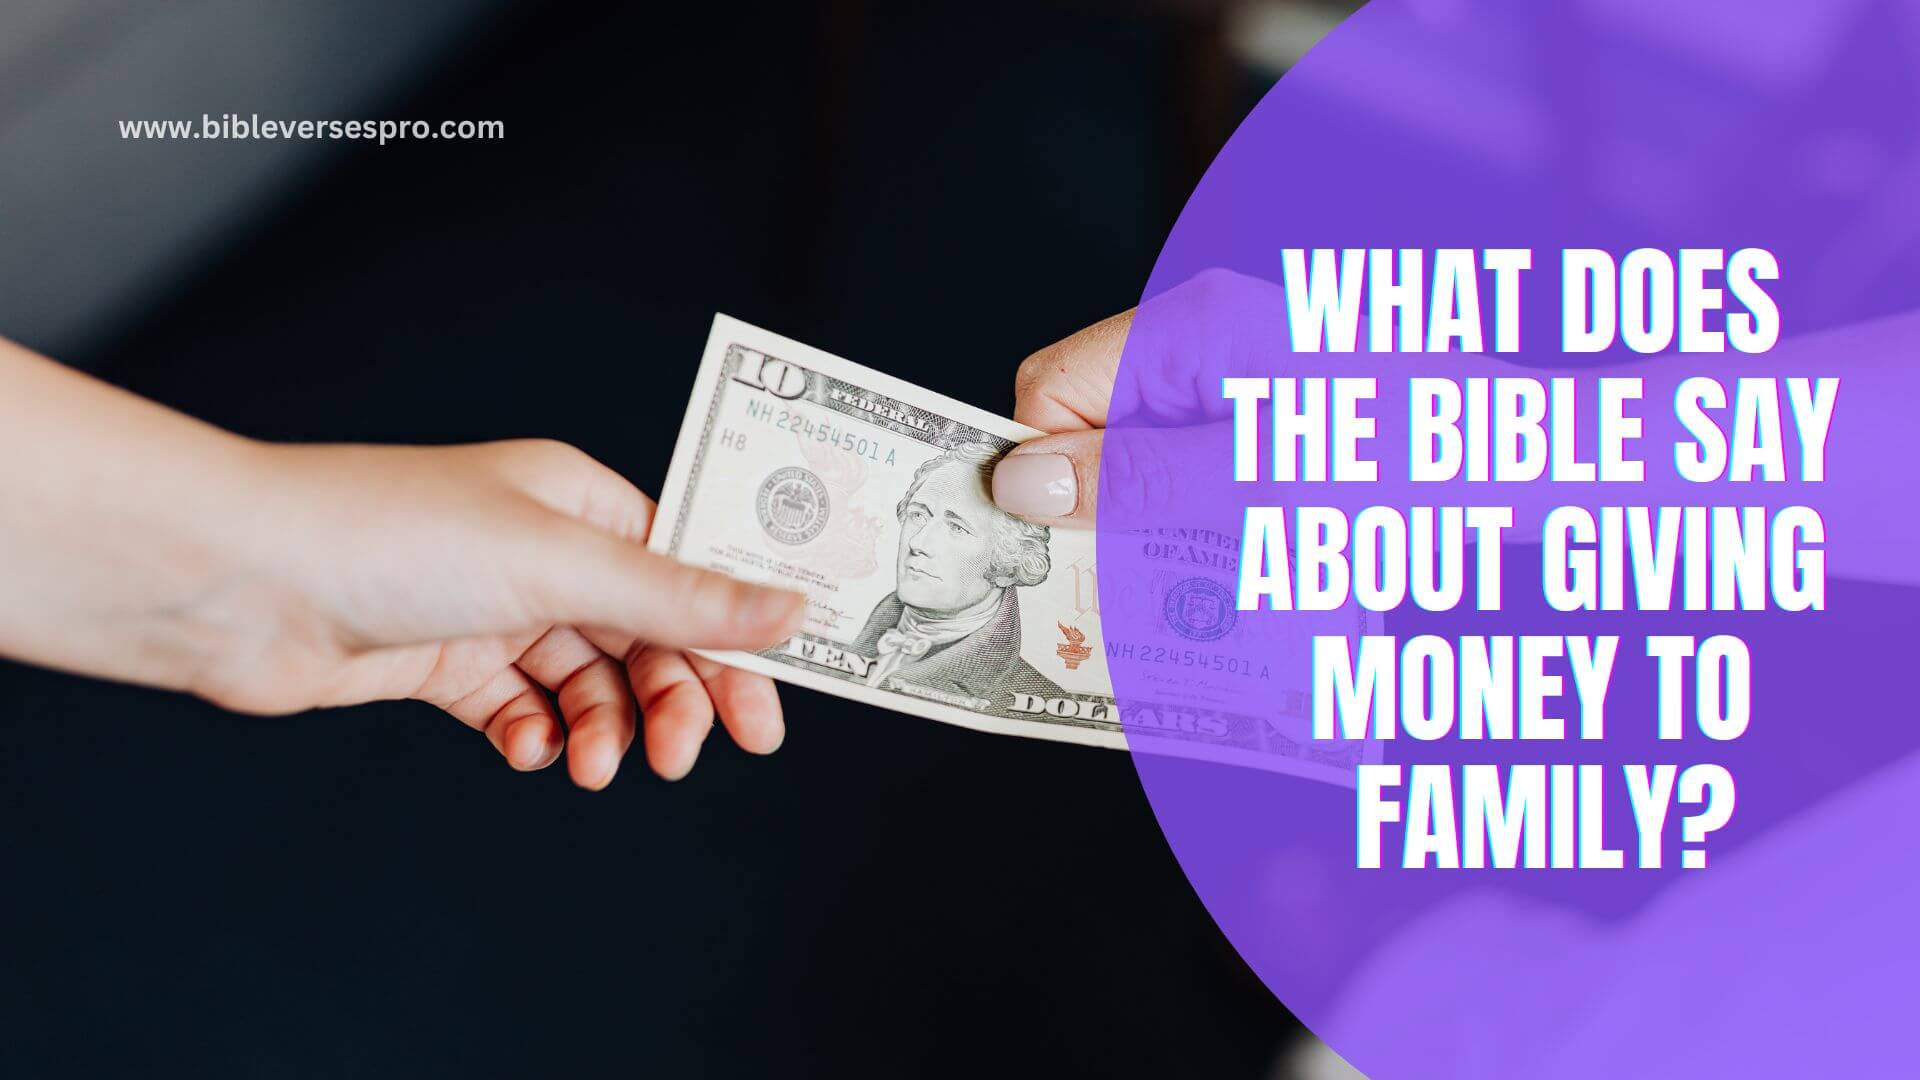 WHAT DOES THE BIBLE SAY ABOUT GIVING MONEY TO FAMILY